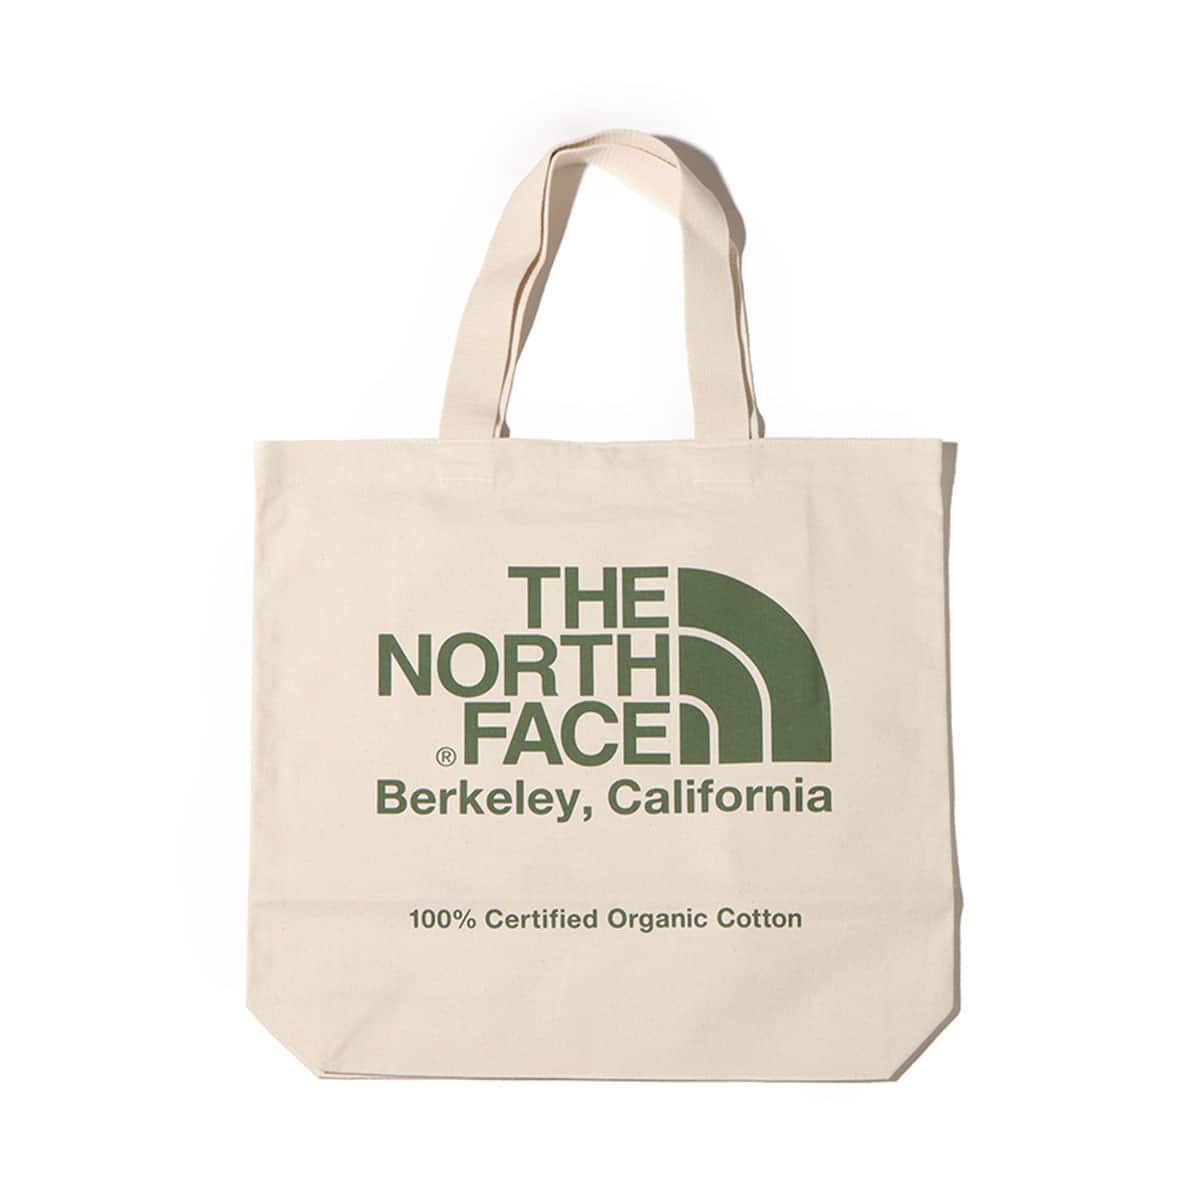 THE NORTH FACE ORGANIC COTTON TOTE NビンヤG 23FW-I_photo_large